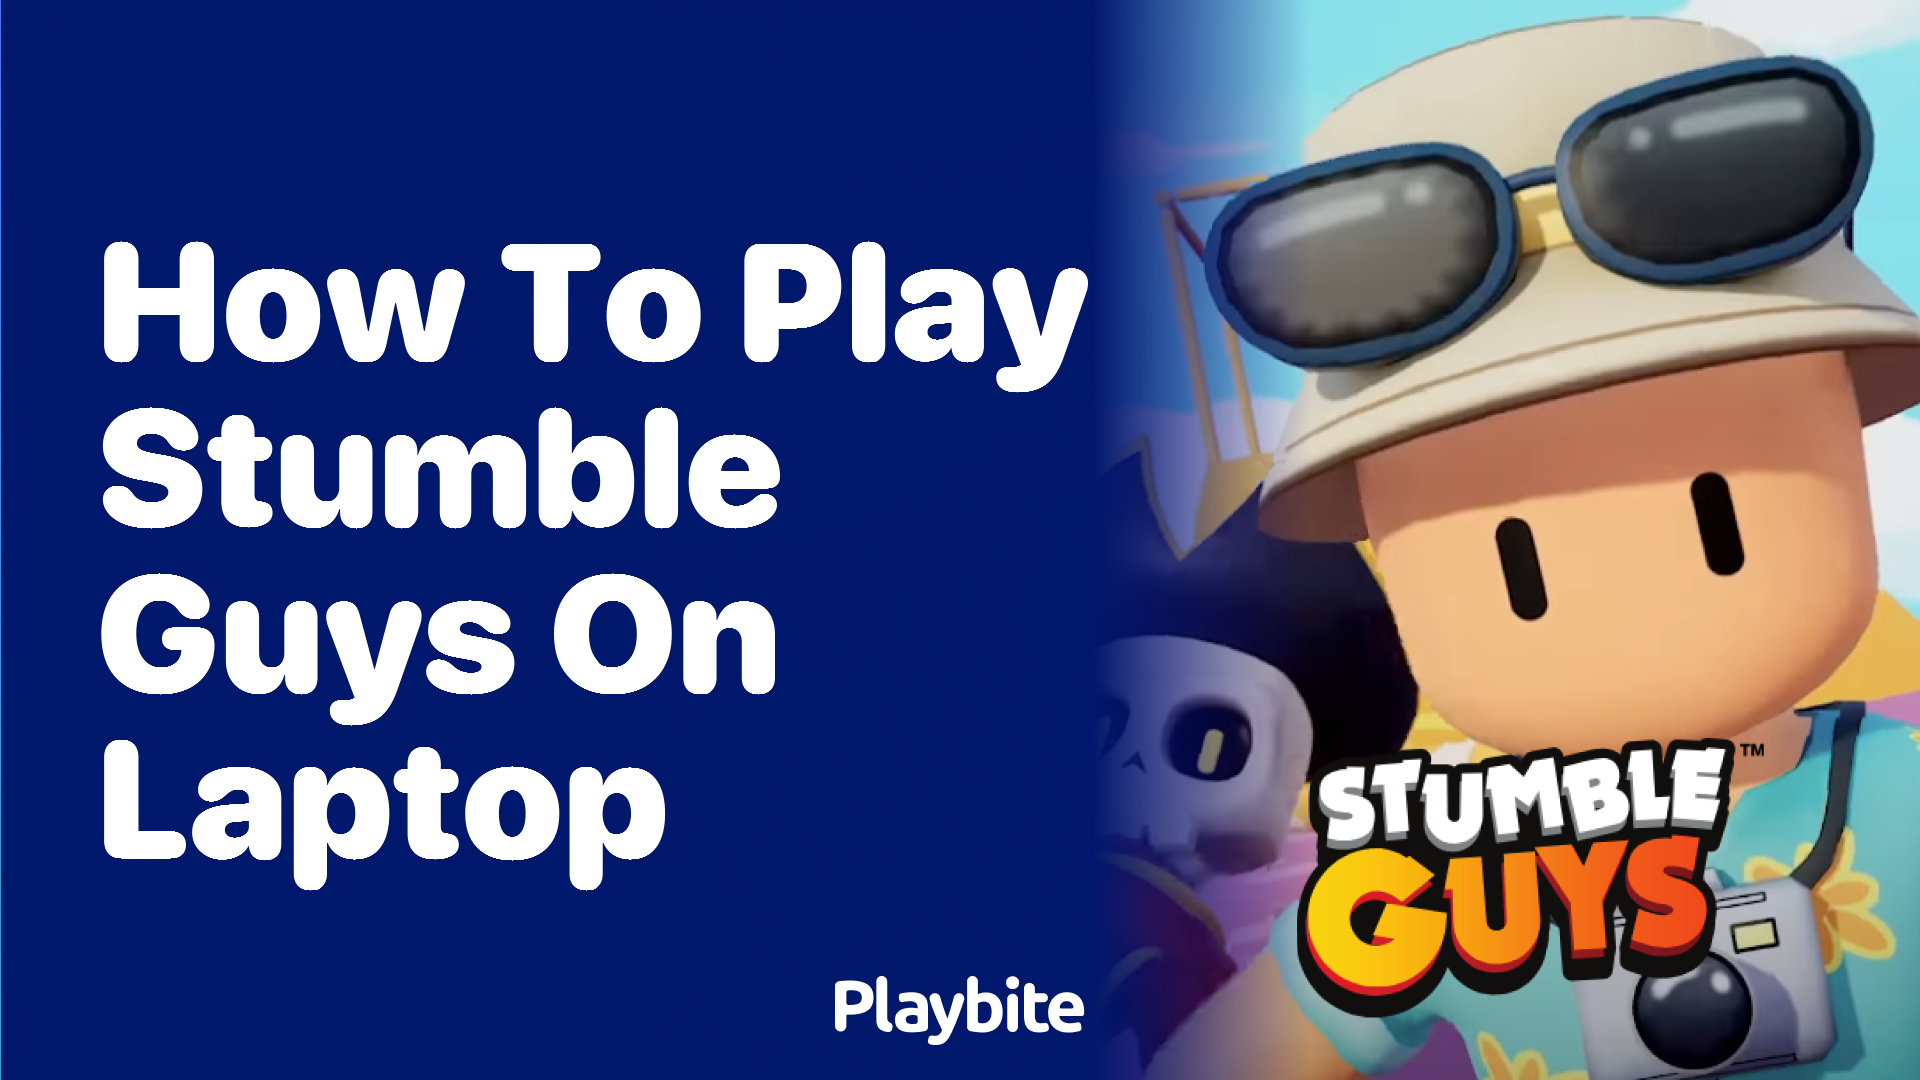 How to Play Stumble Guys on Your Laptop